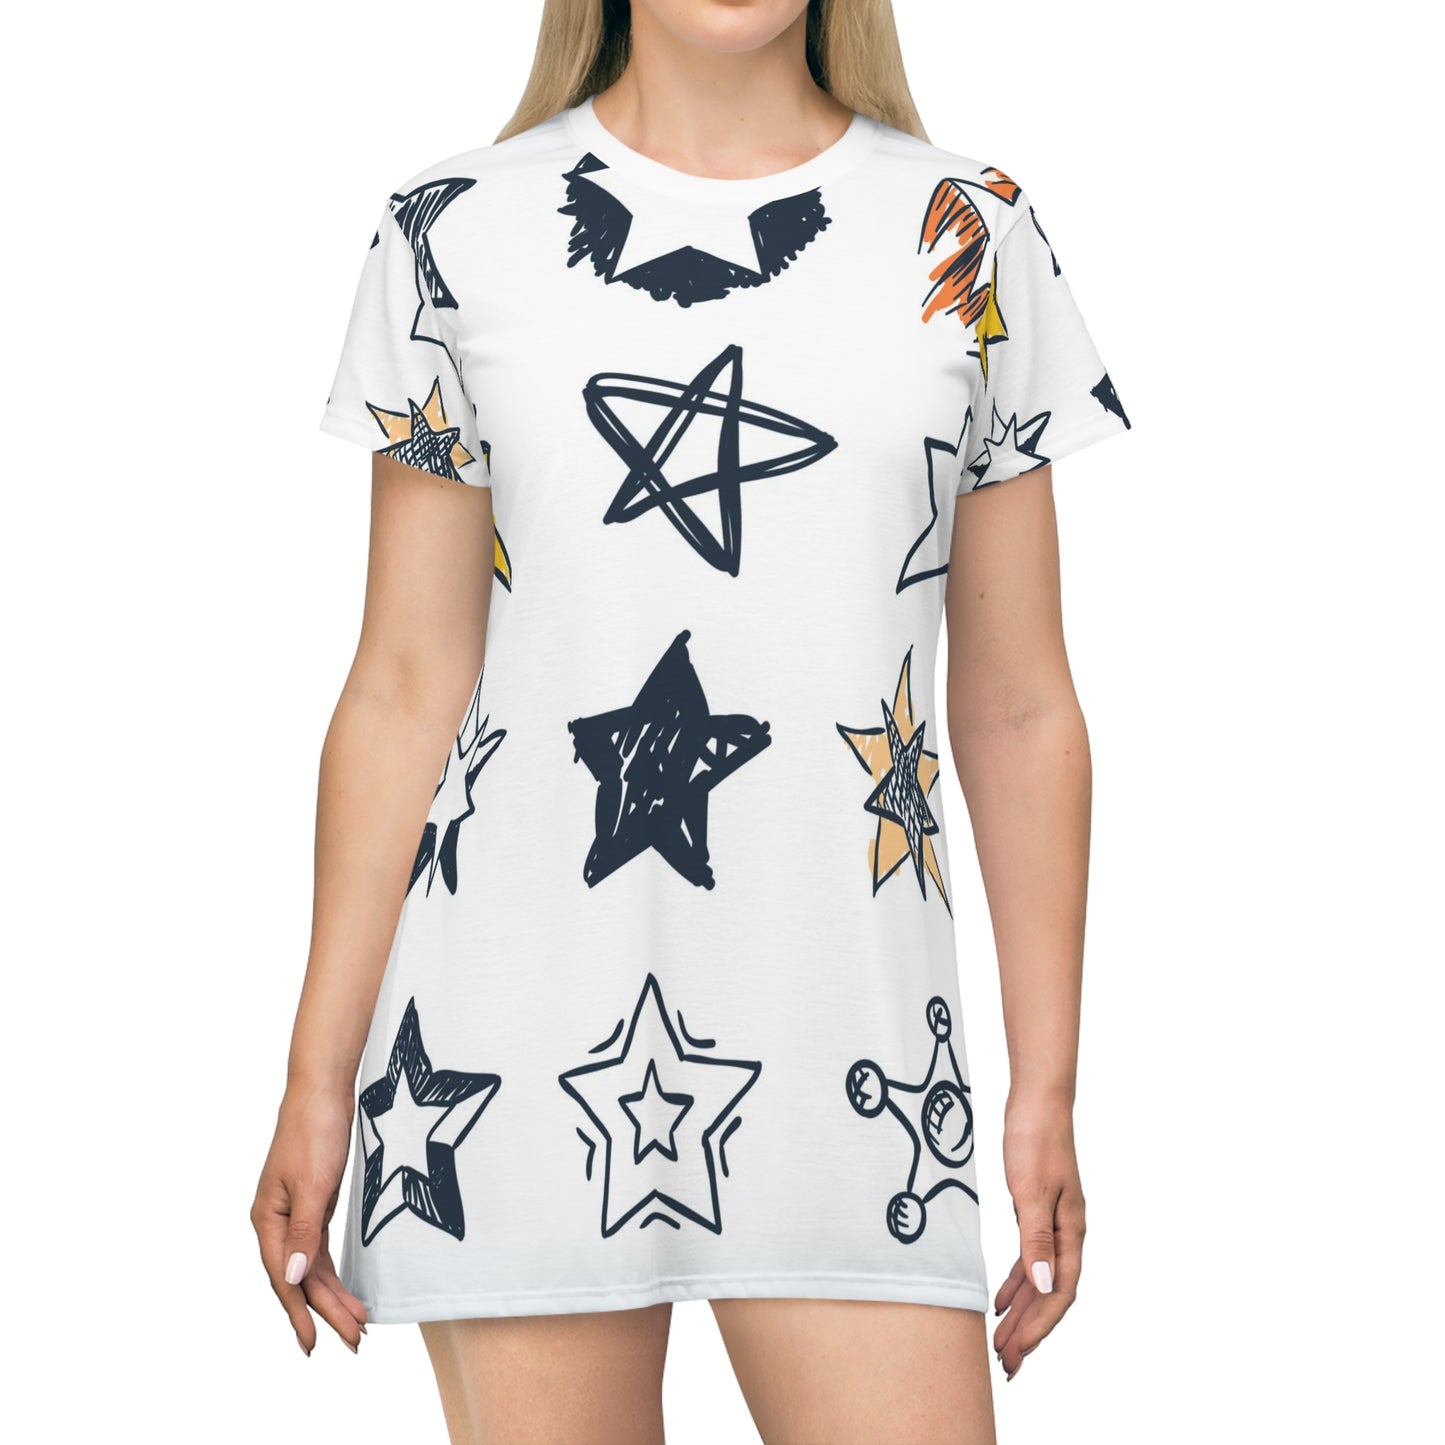 See the Stars- All Over Print T-Shirt Dress